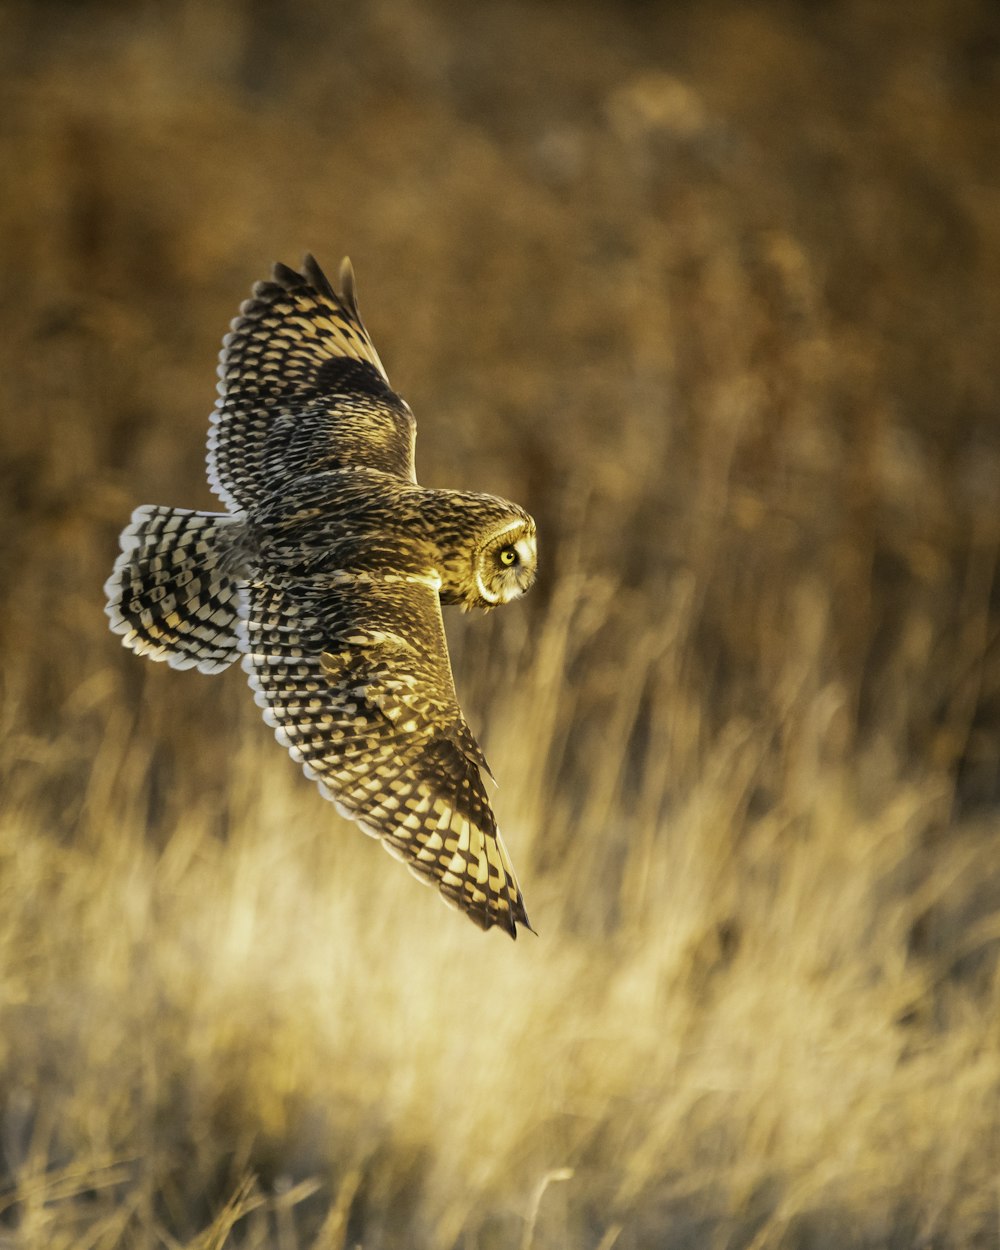 brown and black owl flying during daytime